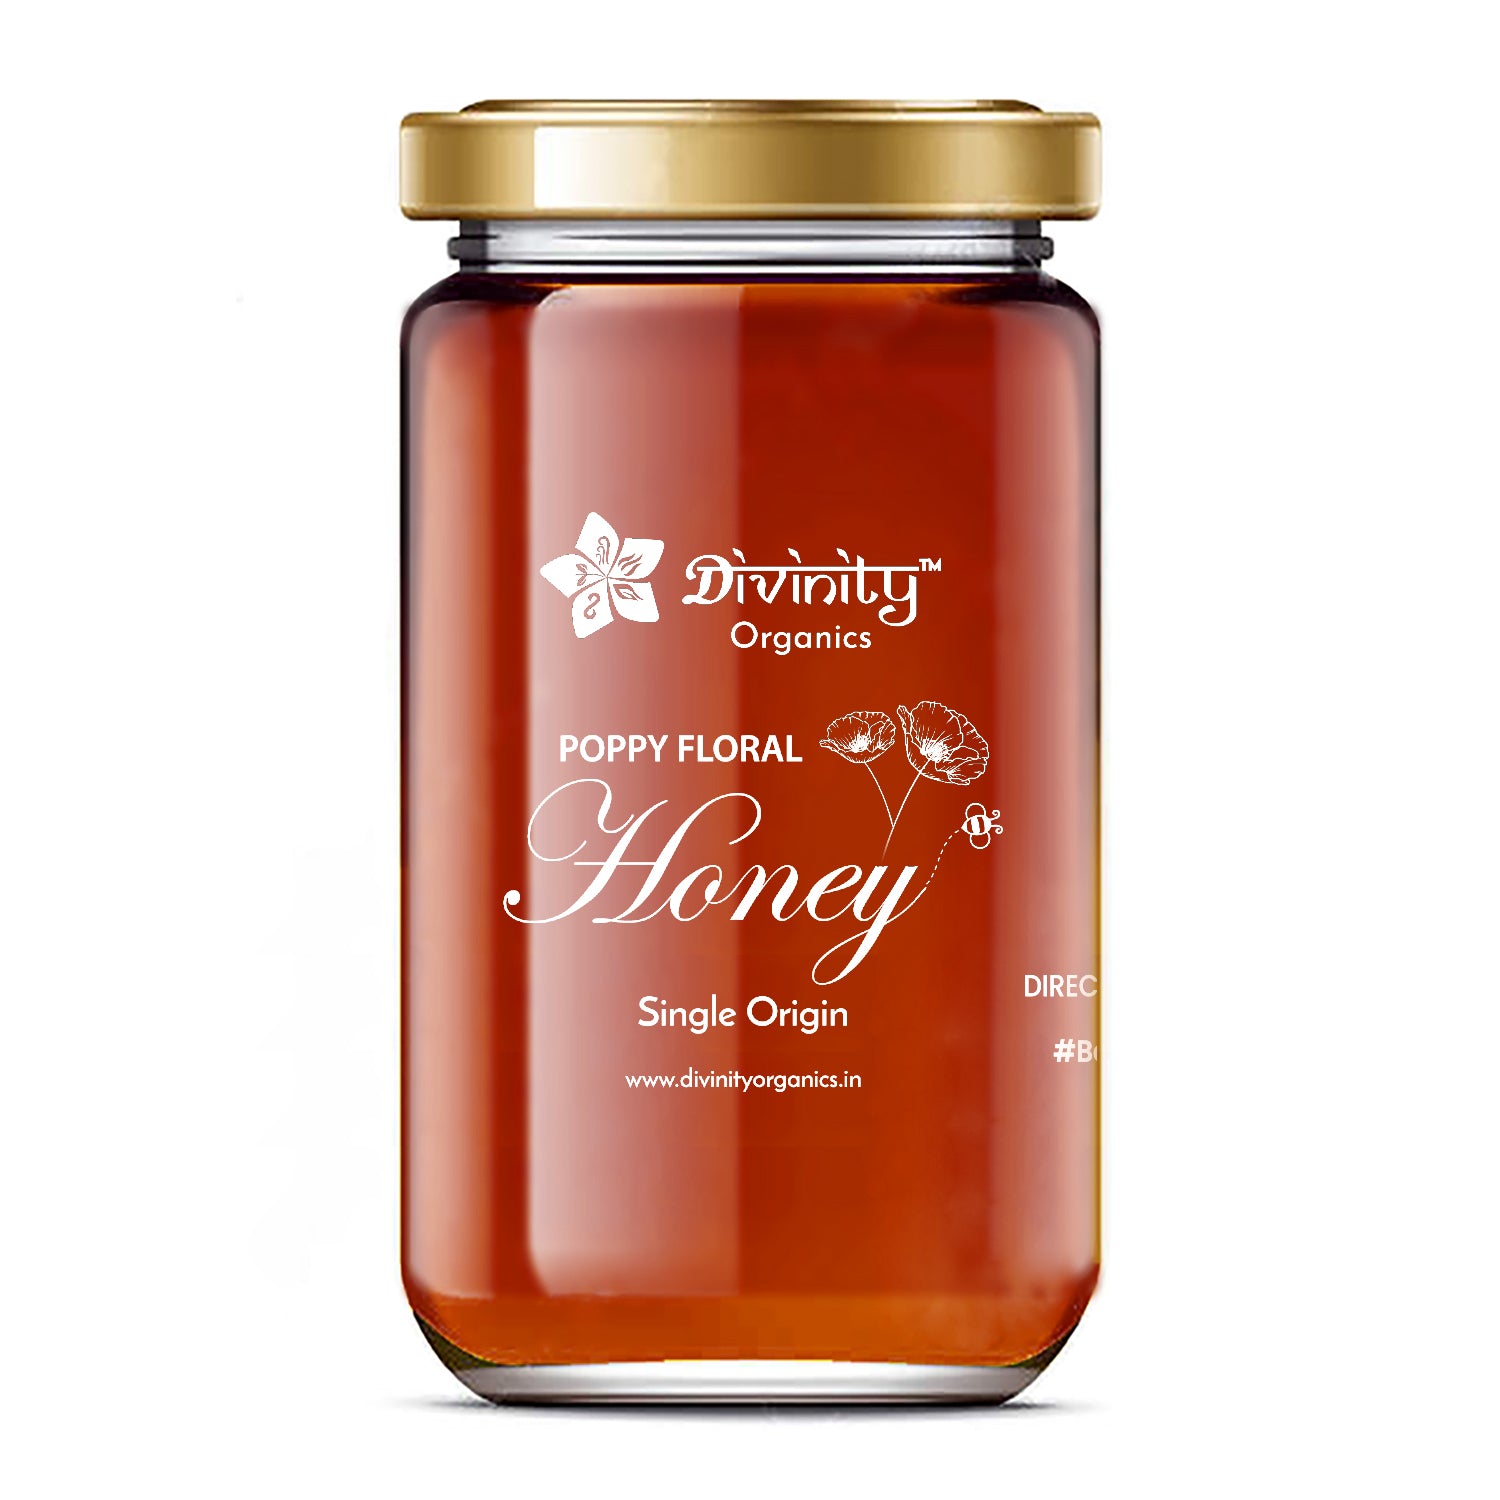 Divinity Organics - Poppy Floral Honey Poppy Floral Honey -Poppy Floral Honey is extracted by placing beehives near Poppy farms in Sitamarhi district of Bihar near Nepal border. Cultivated in summers, this flower honey has many medicinal properties. Whether tackling dry cough or relieving muscle spasms, this honey is a common ingredient when preparing home remedies